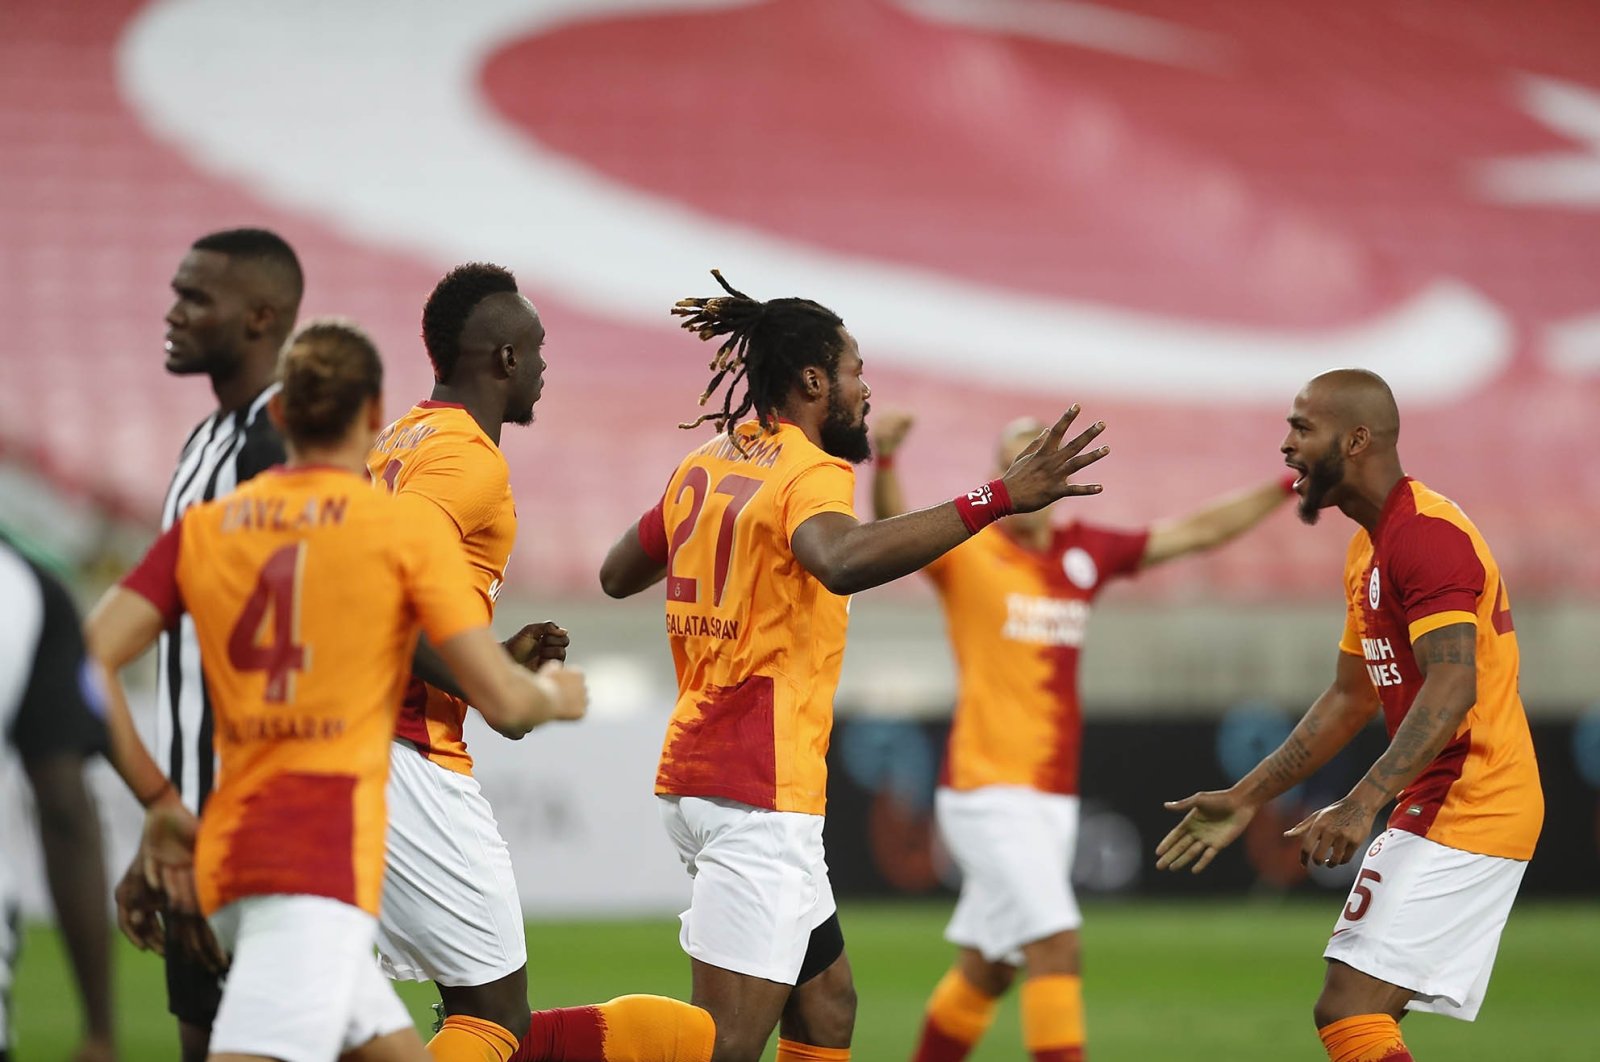 Galatasaray advances in Europa League qualifier after defeating Neftçi - Daily Sabah